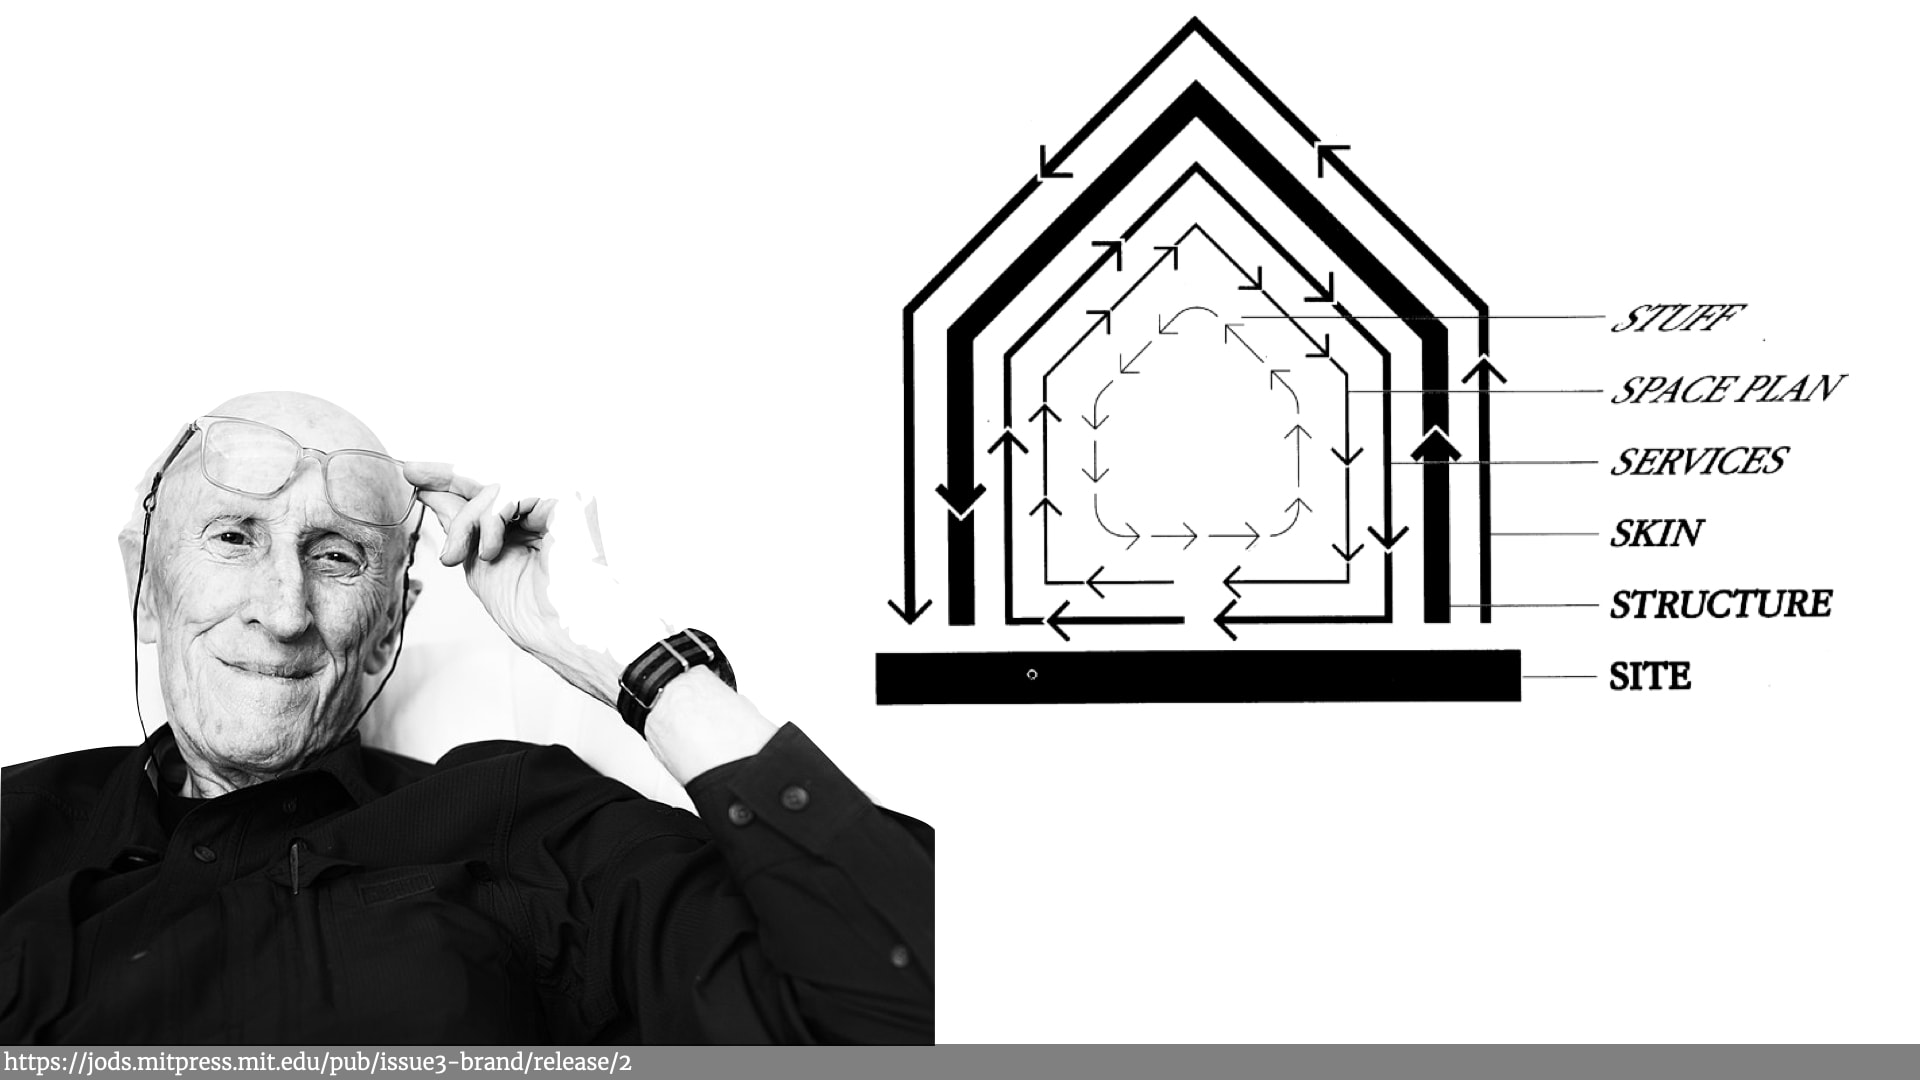 To the left is a black and white picture of Stuart Brand lifting his glasses to his forehead. To the right is a stylised illustration of various layers of a house with 'stuff' at the centre, surrounded by 'space plan', 'services', 'skin', 'structure', and finally 'site'.